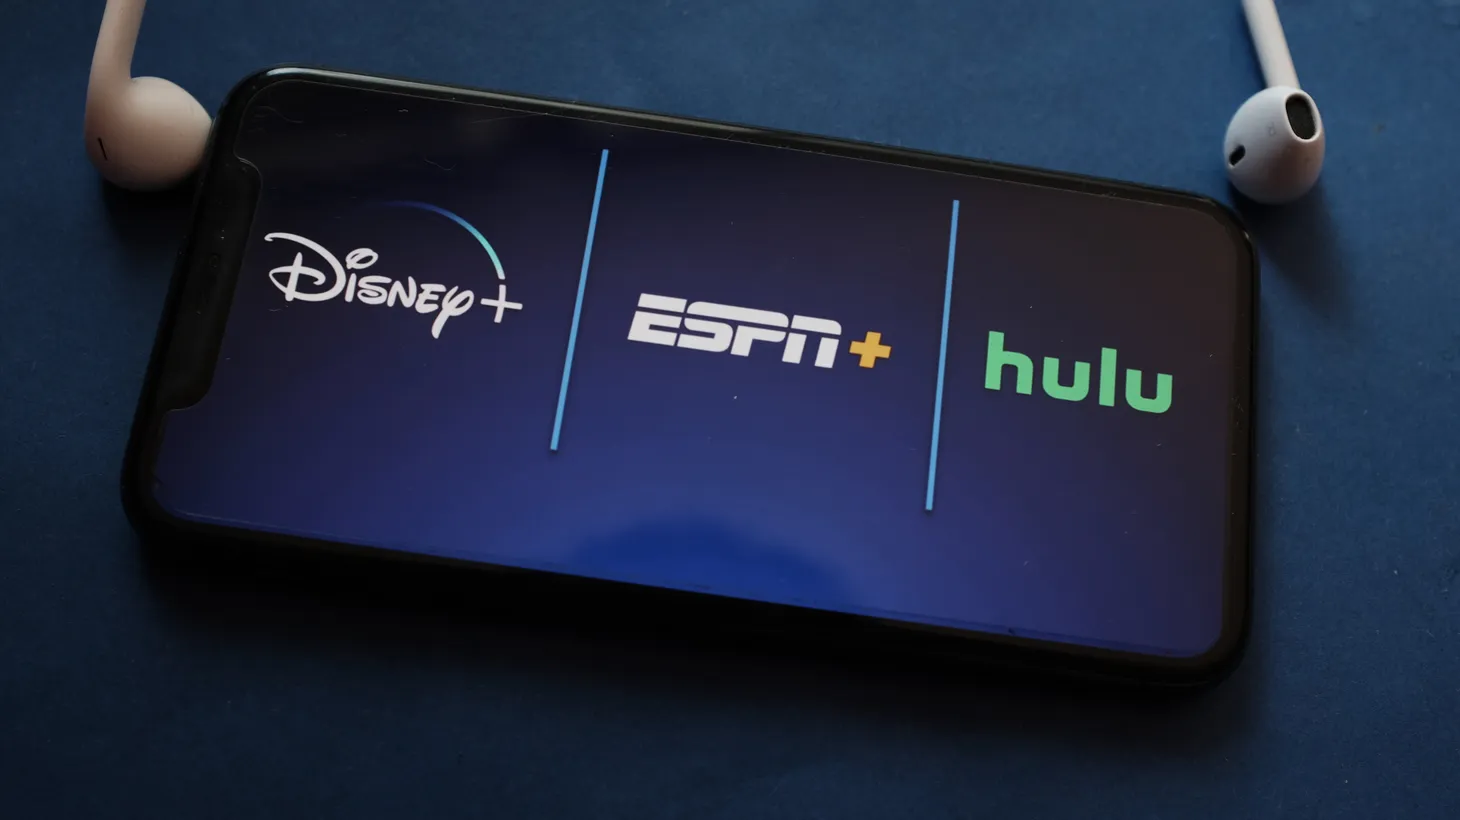 “Now [Wall Street is] looking at profitability, and Disney is stuck here with tons of subs, but people [are] not paying very much,” says Matt Belloni, founding partner of Puck News.